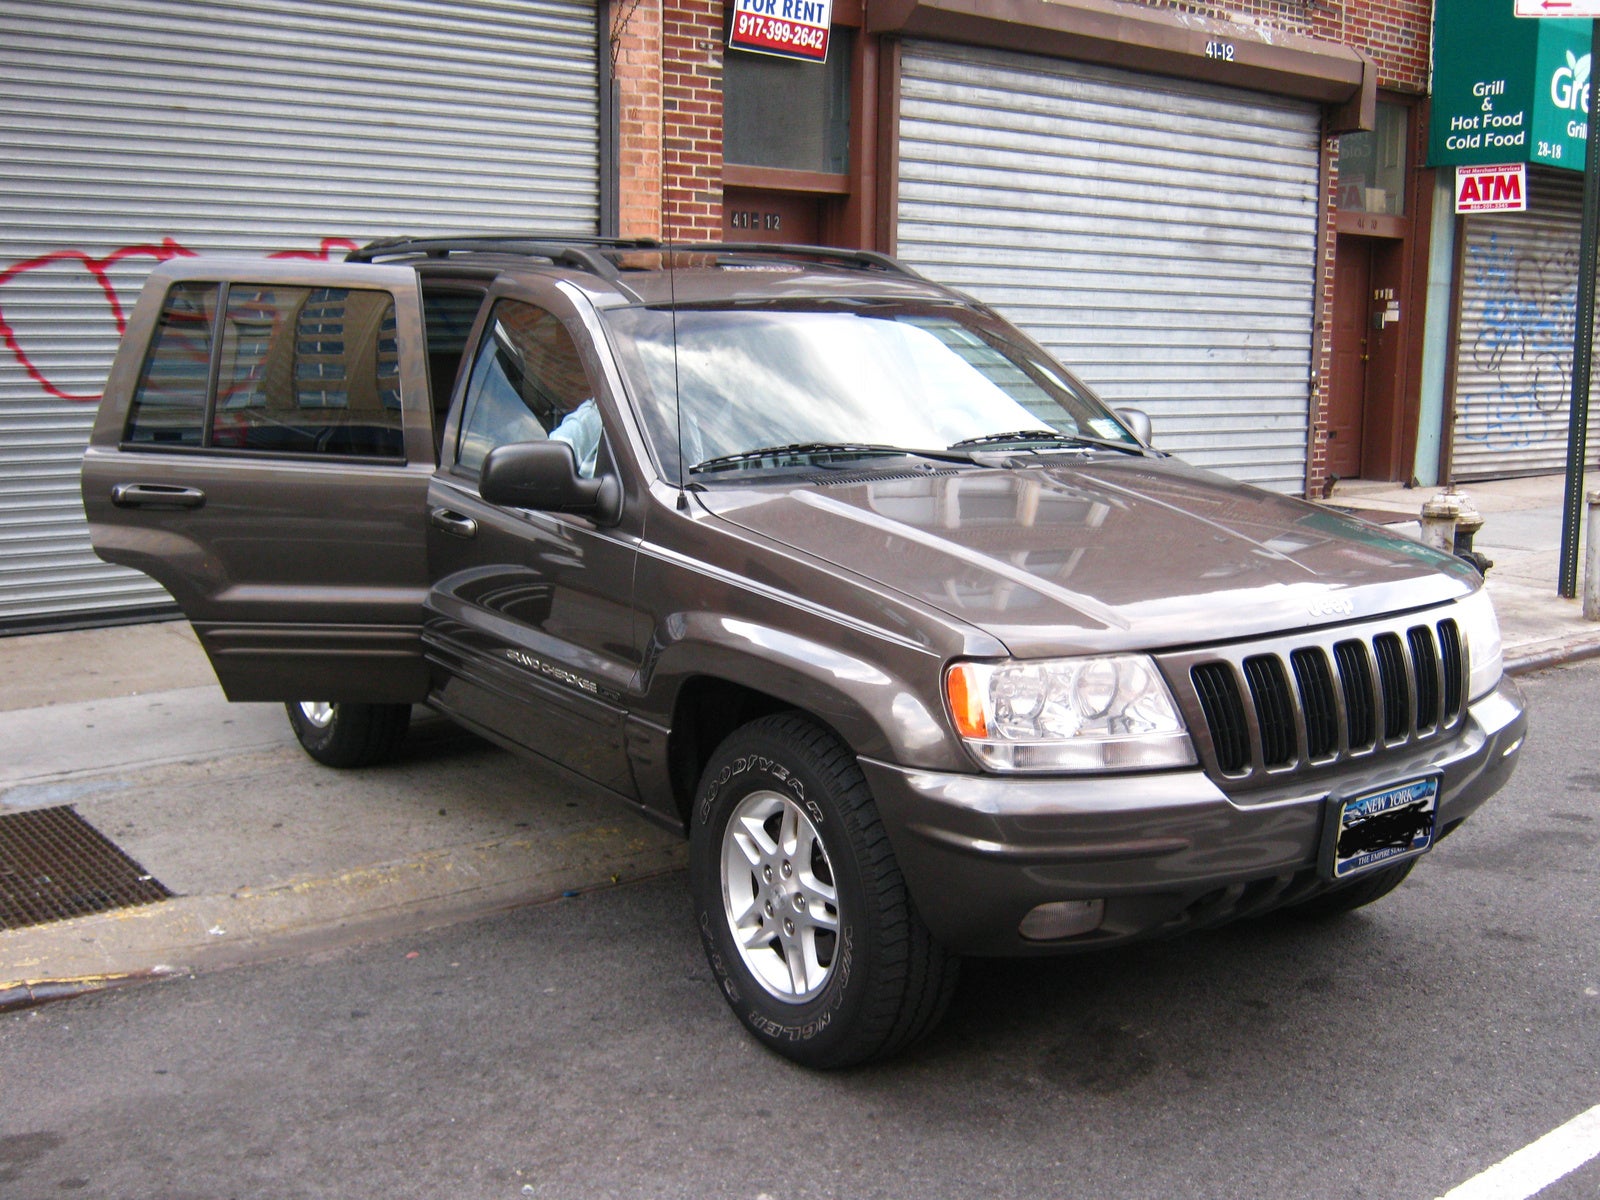 Cherokee jeep review 2000 #4